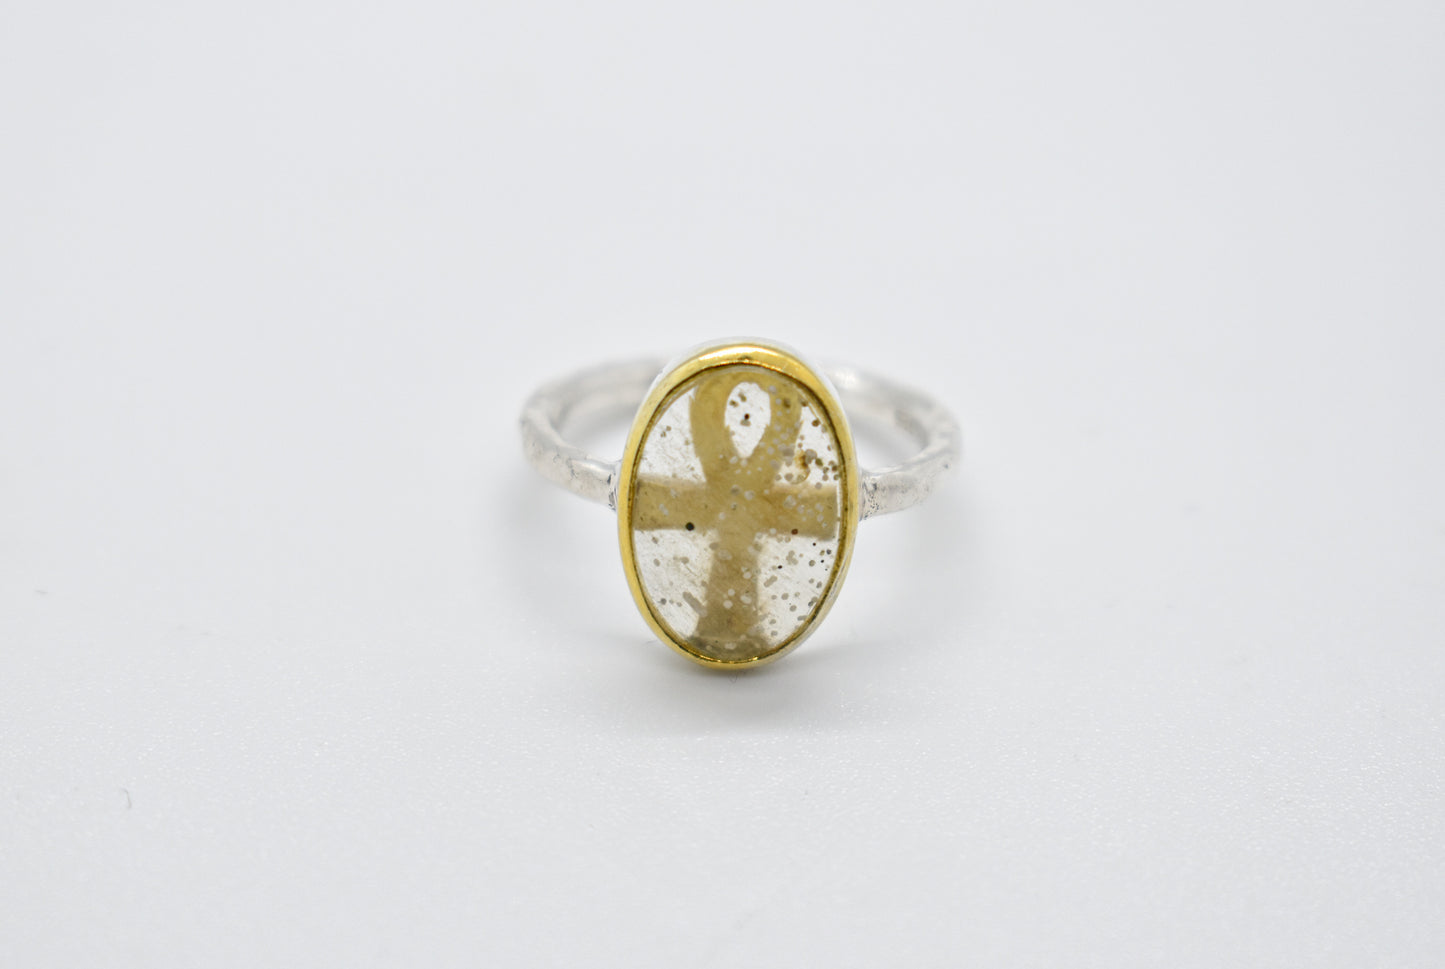 Libyan Glass with Ankh Ring (Size 8)